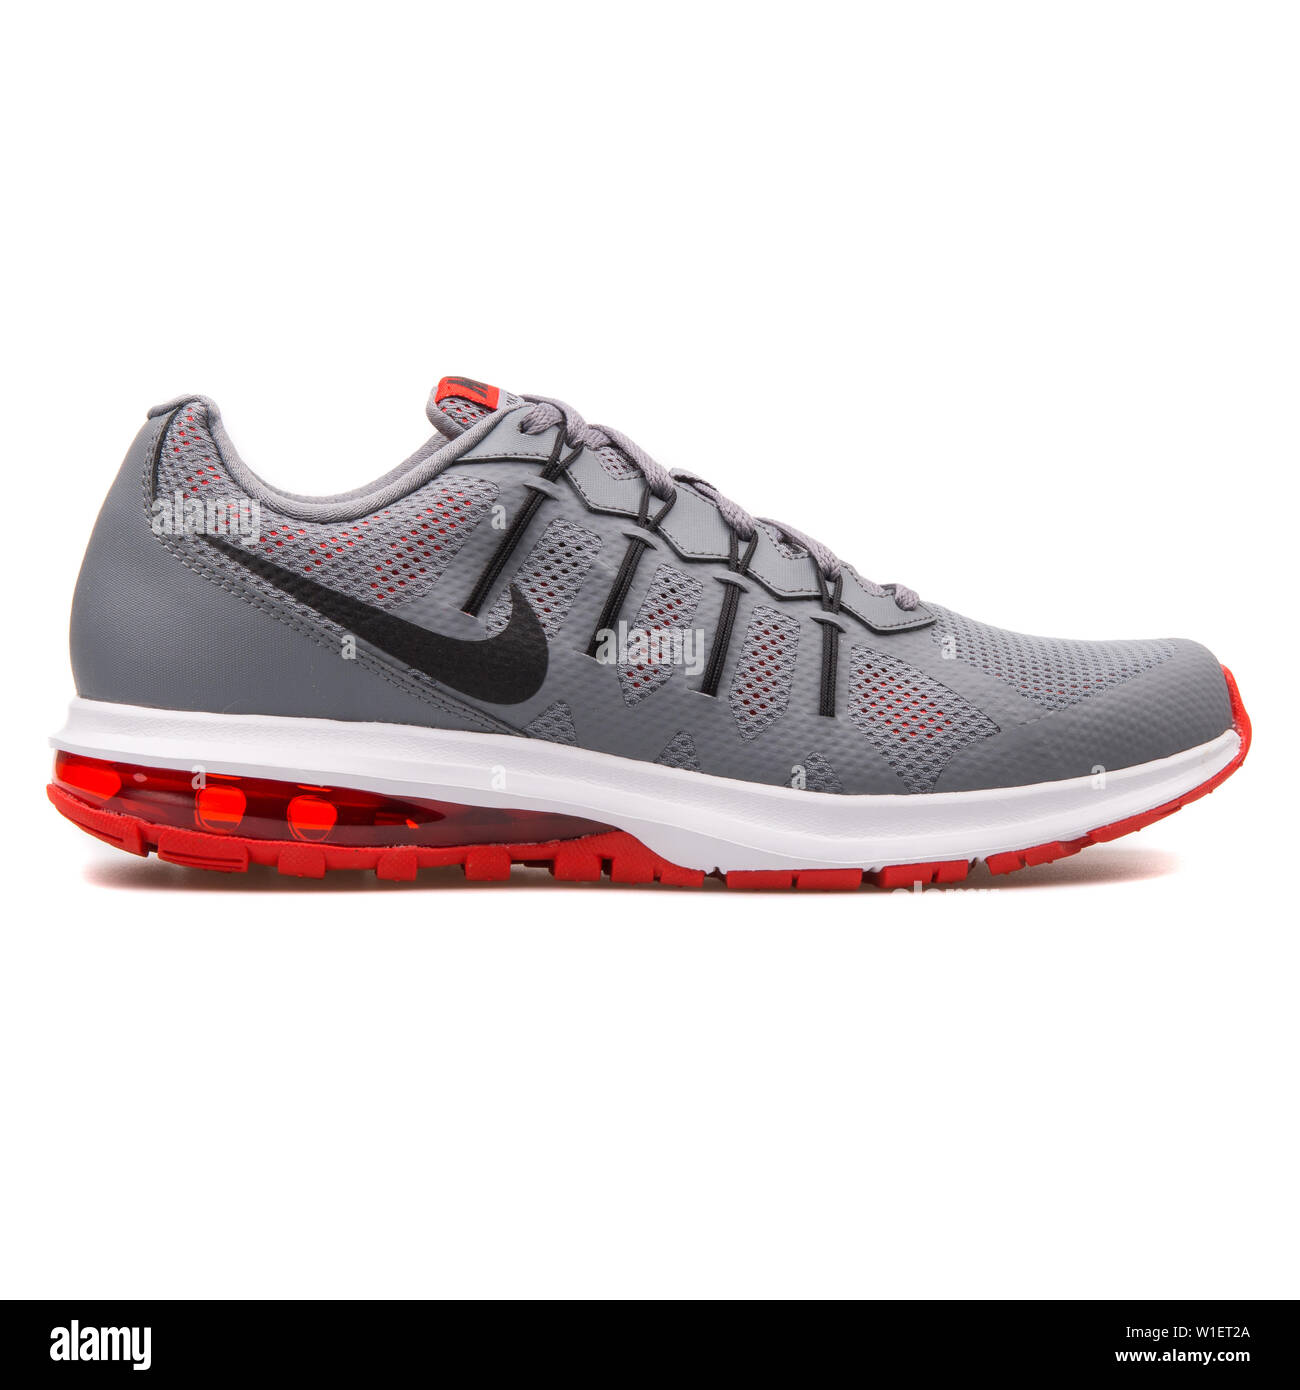 VIENNA, AUSTRIA - AUGUST 10, 2017: Nike Air Max Dynasty grey and red  sneaker on white background Stock Photo - Alamy